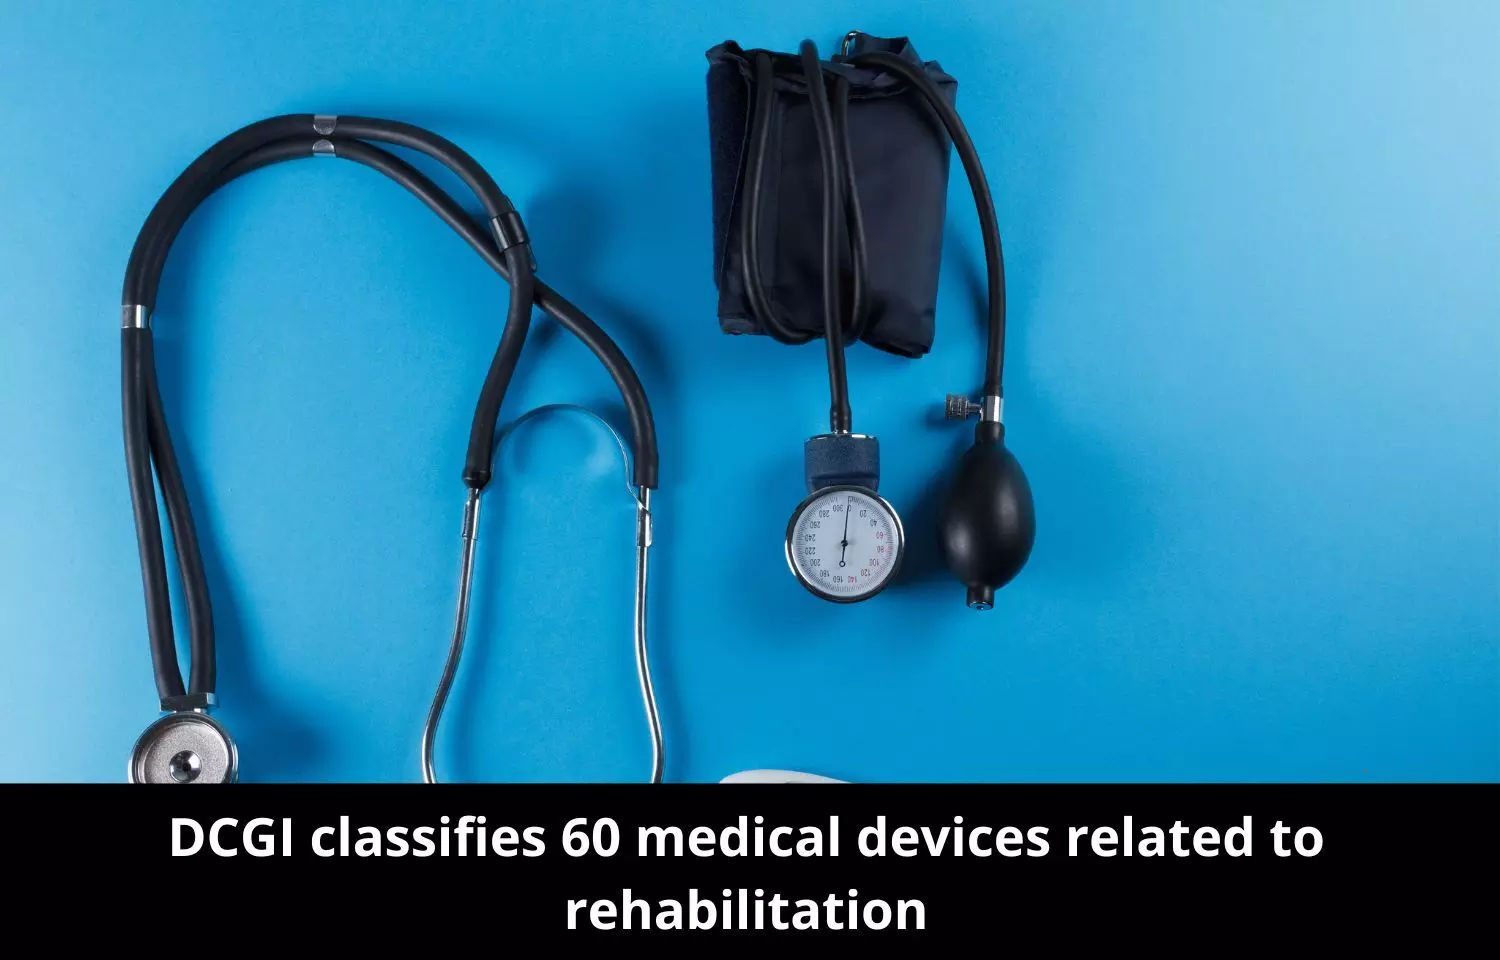 DCGI classifies 60 medical devices related to rehabilitation